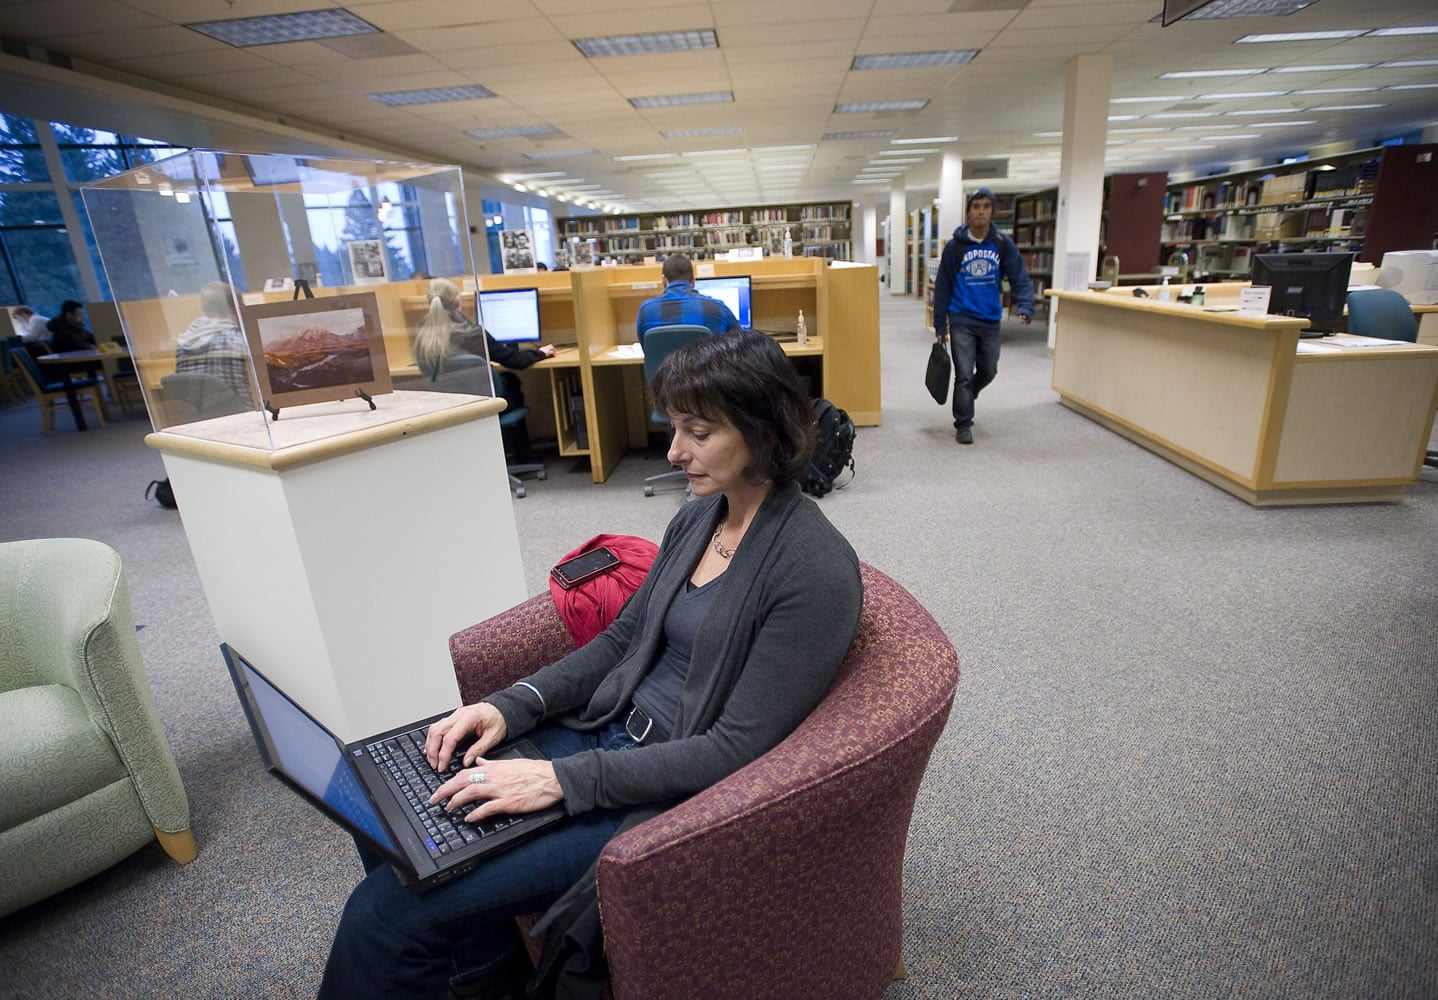 Gerontology student Maria Lattanzi, 53, works on a final paper on adult development and aging at the Washington State University Vancouver library.